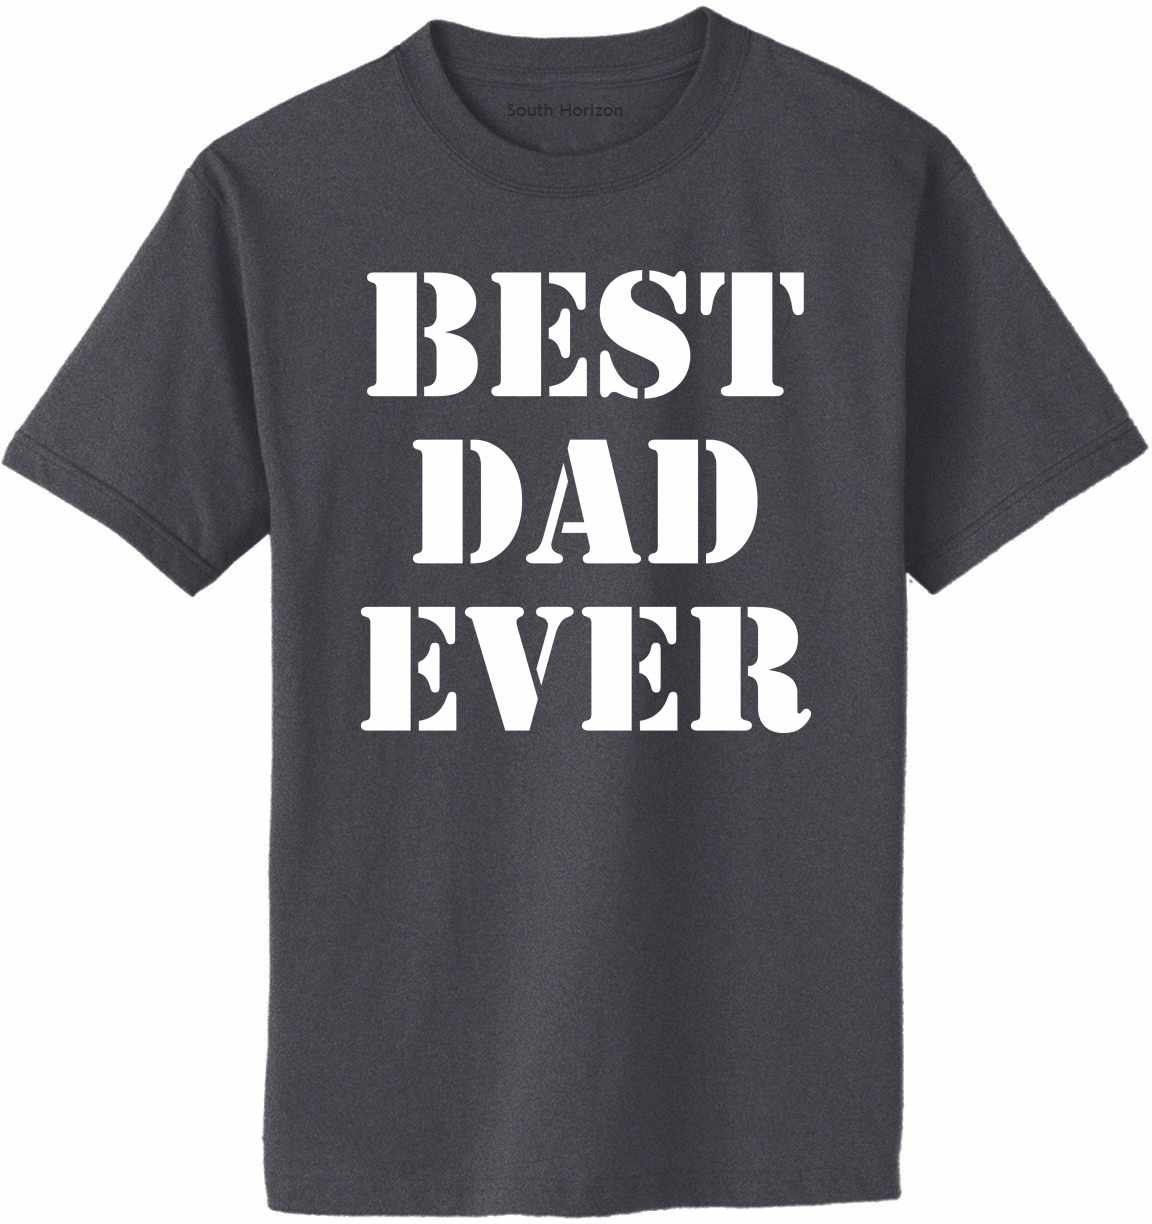 Best Dad Ever Adult T-Shirt (#803-1)